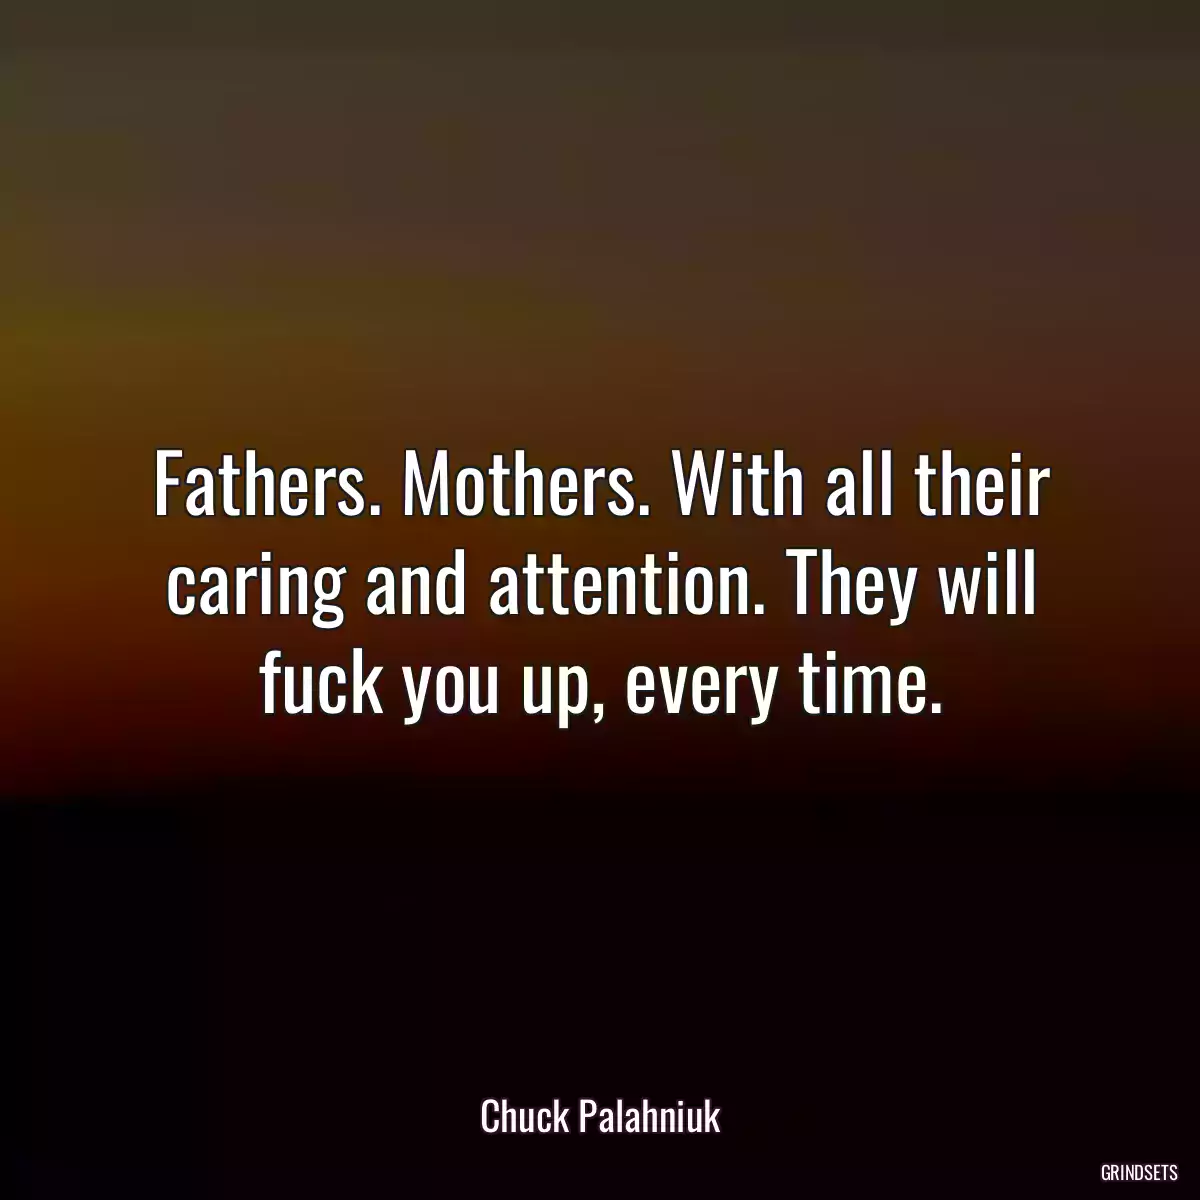 Fathers. Mothers. With all their caring and attention. They will fuck you up, every time.